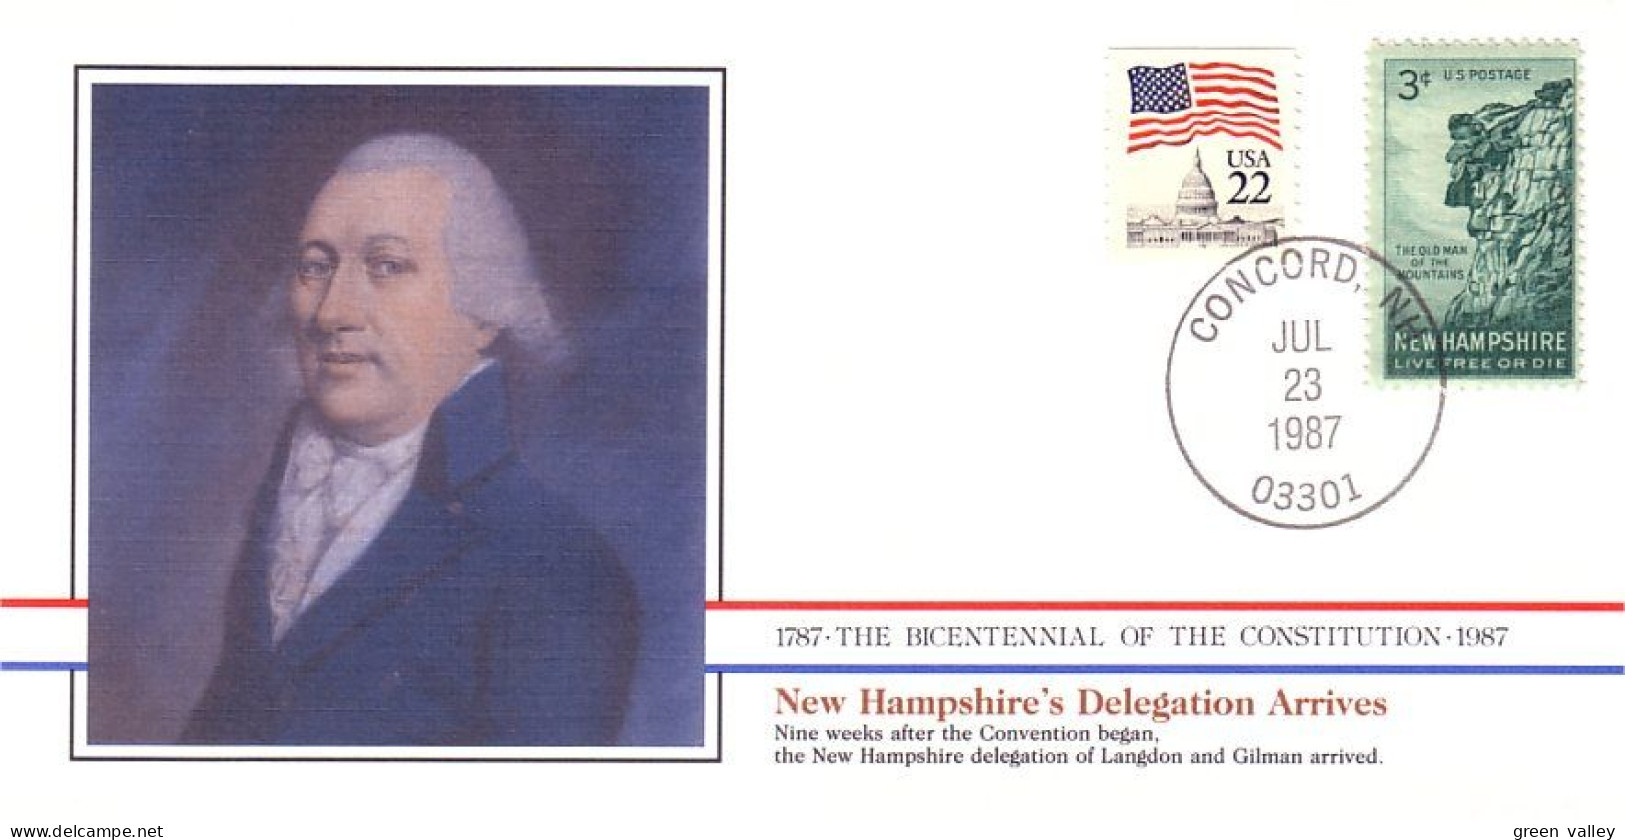 American Constitution New Hampshire's Delegation Arrives Jul 23 1787 Cover ( A82 20) - Unabhängigkeit USA